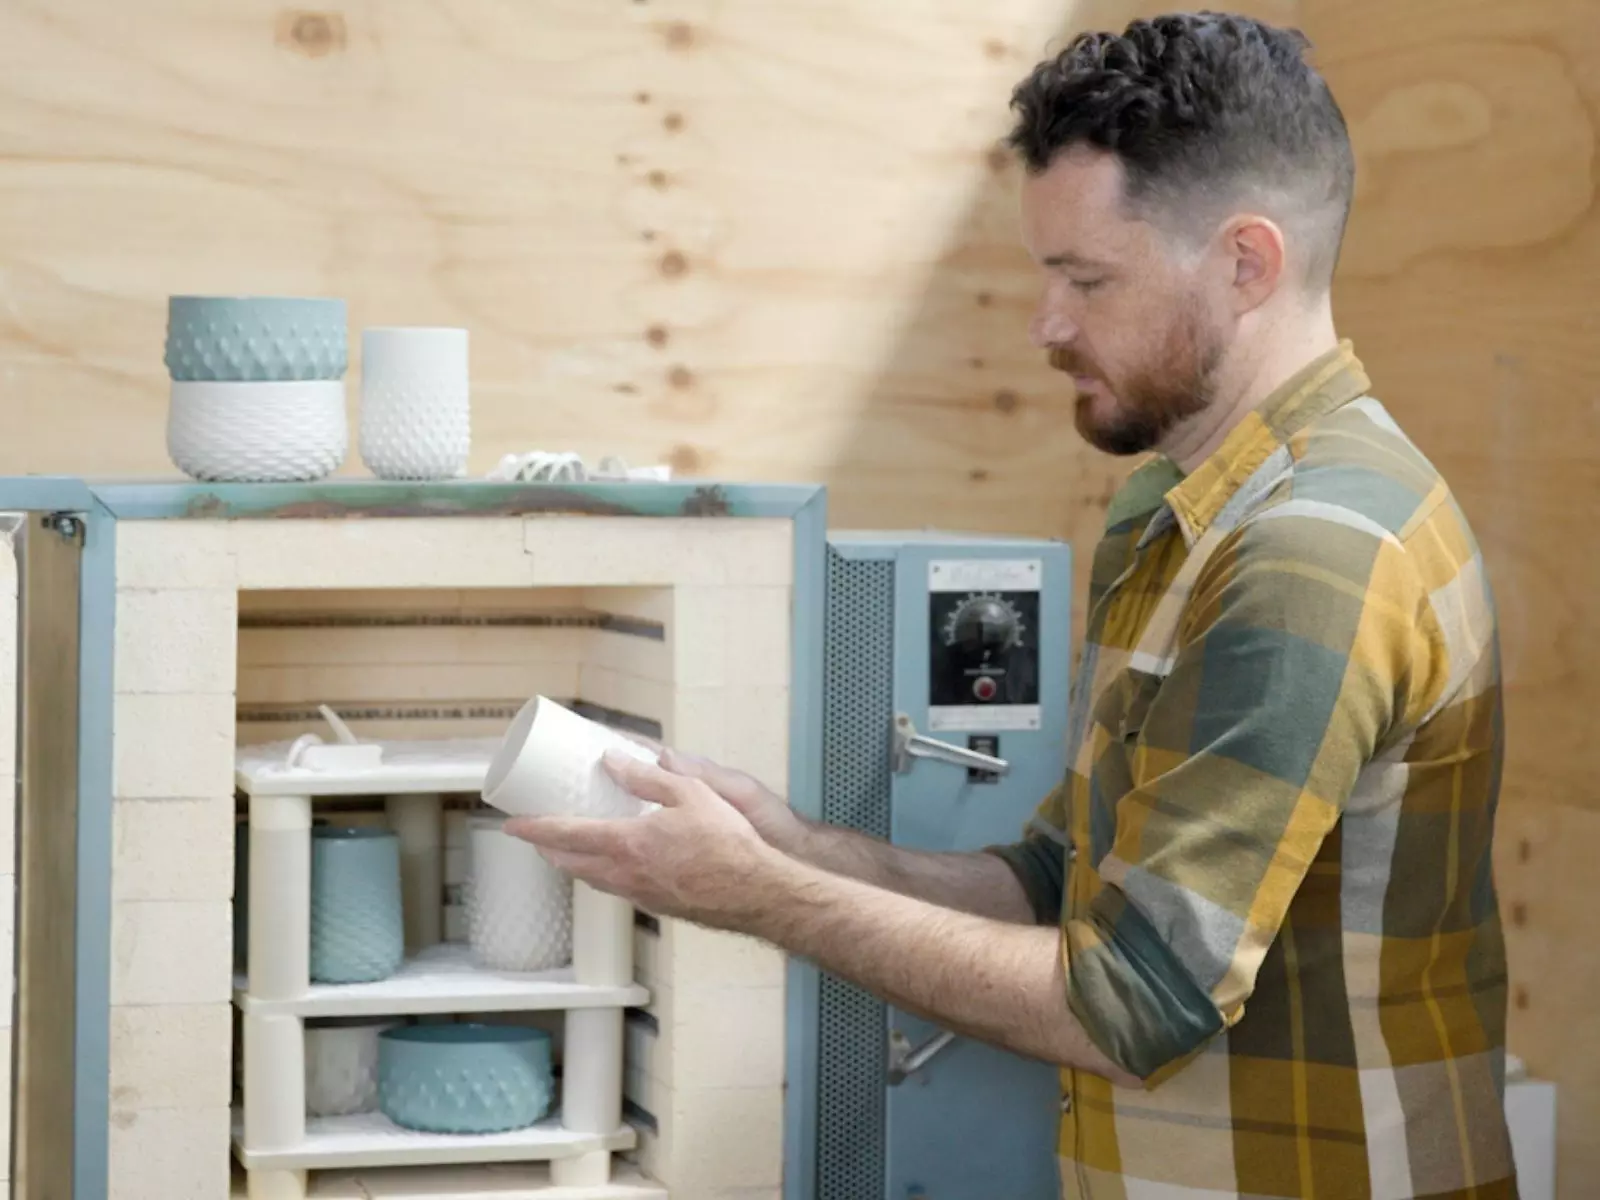 A man in a shirt crafting a white object in a wooden room.